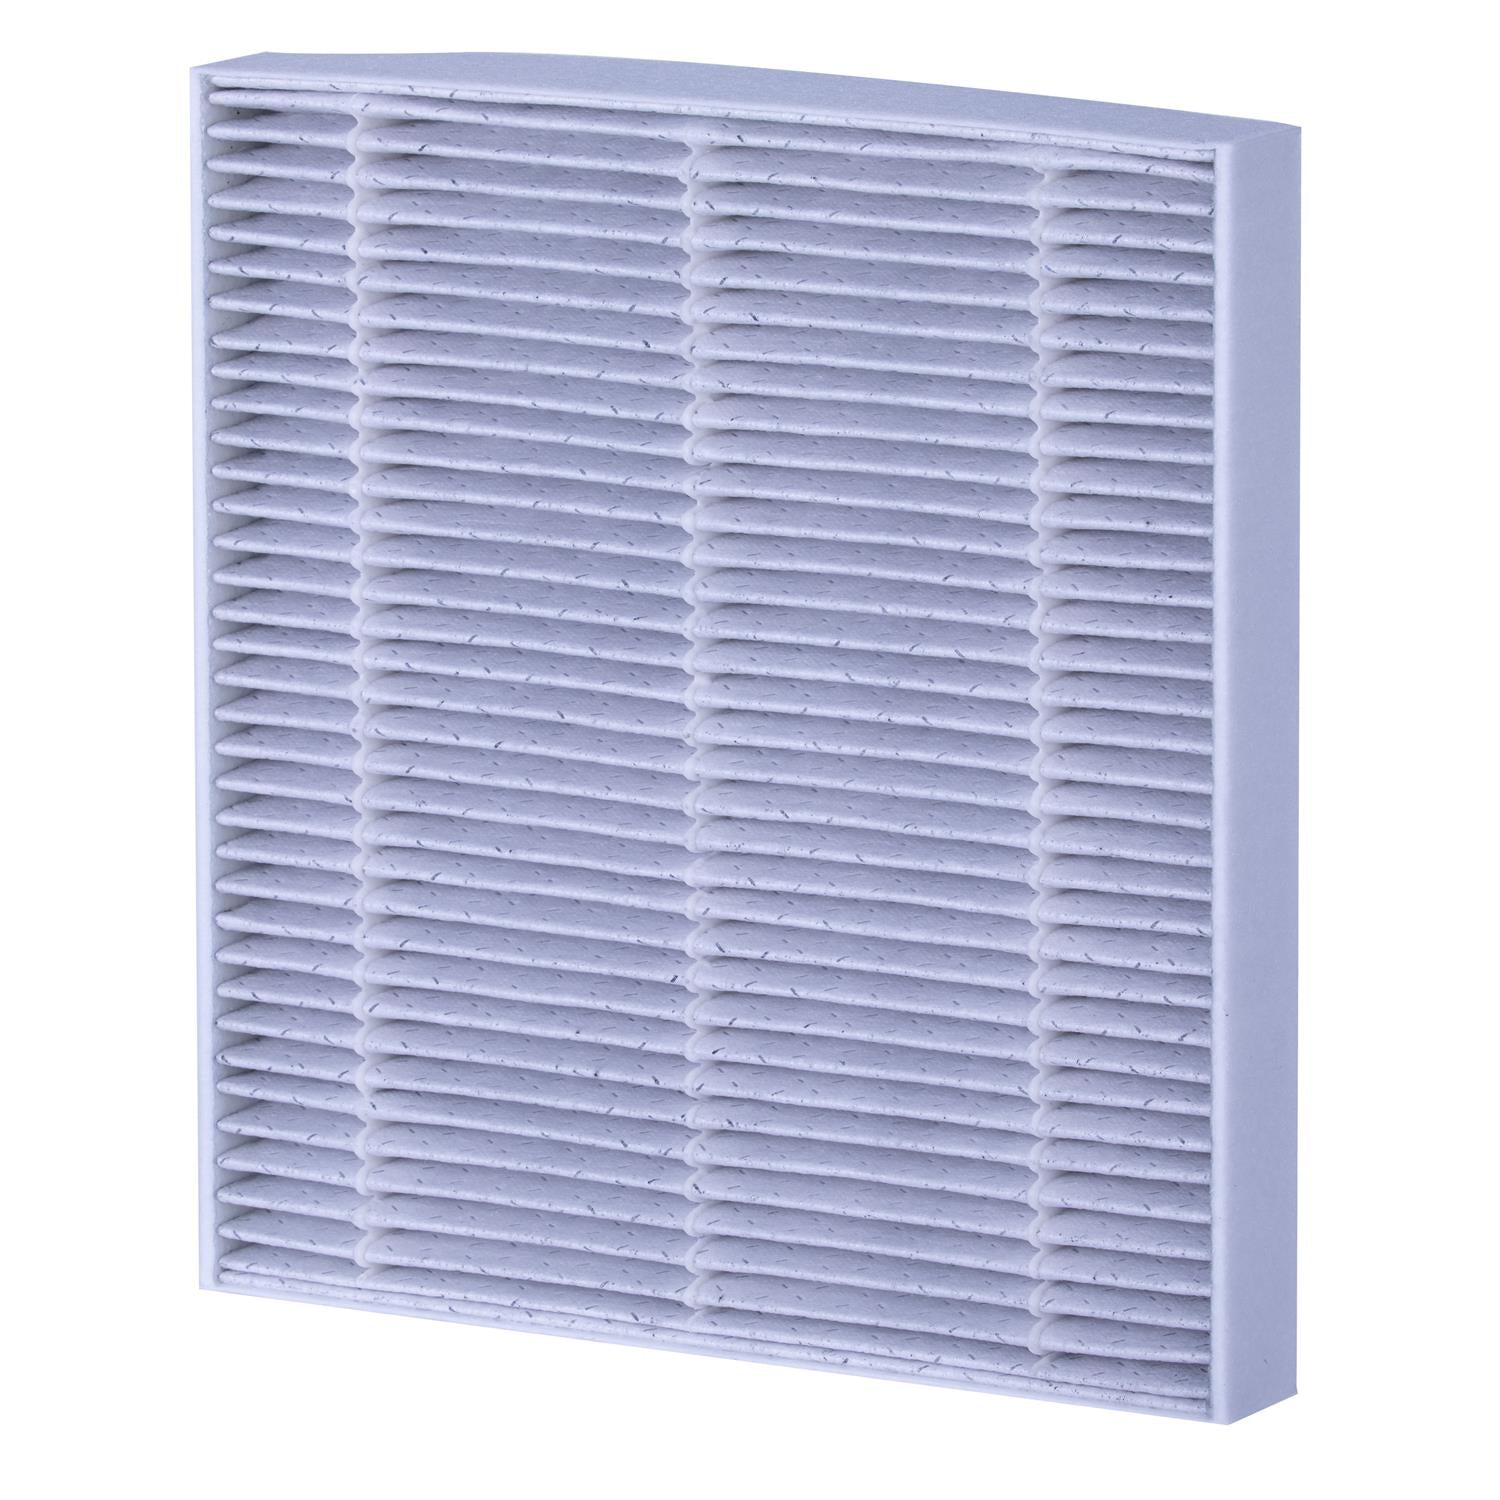 PUREFLOW 2019 Volkswagen Golf R Cabin Air Filter with HEPA and Antibacterial Technology, PC99204HX